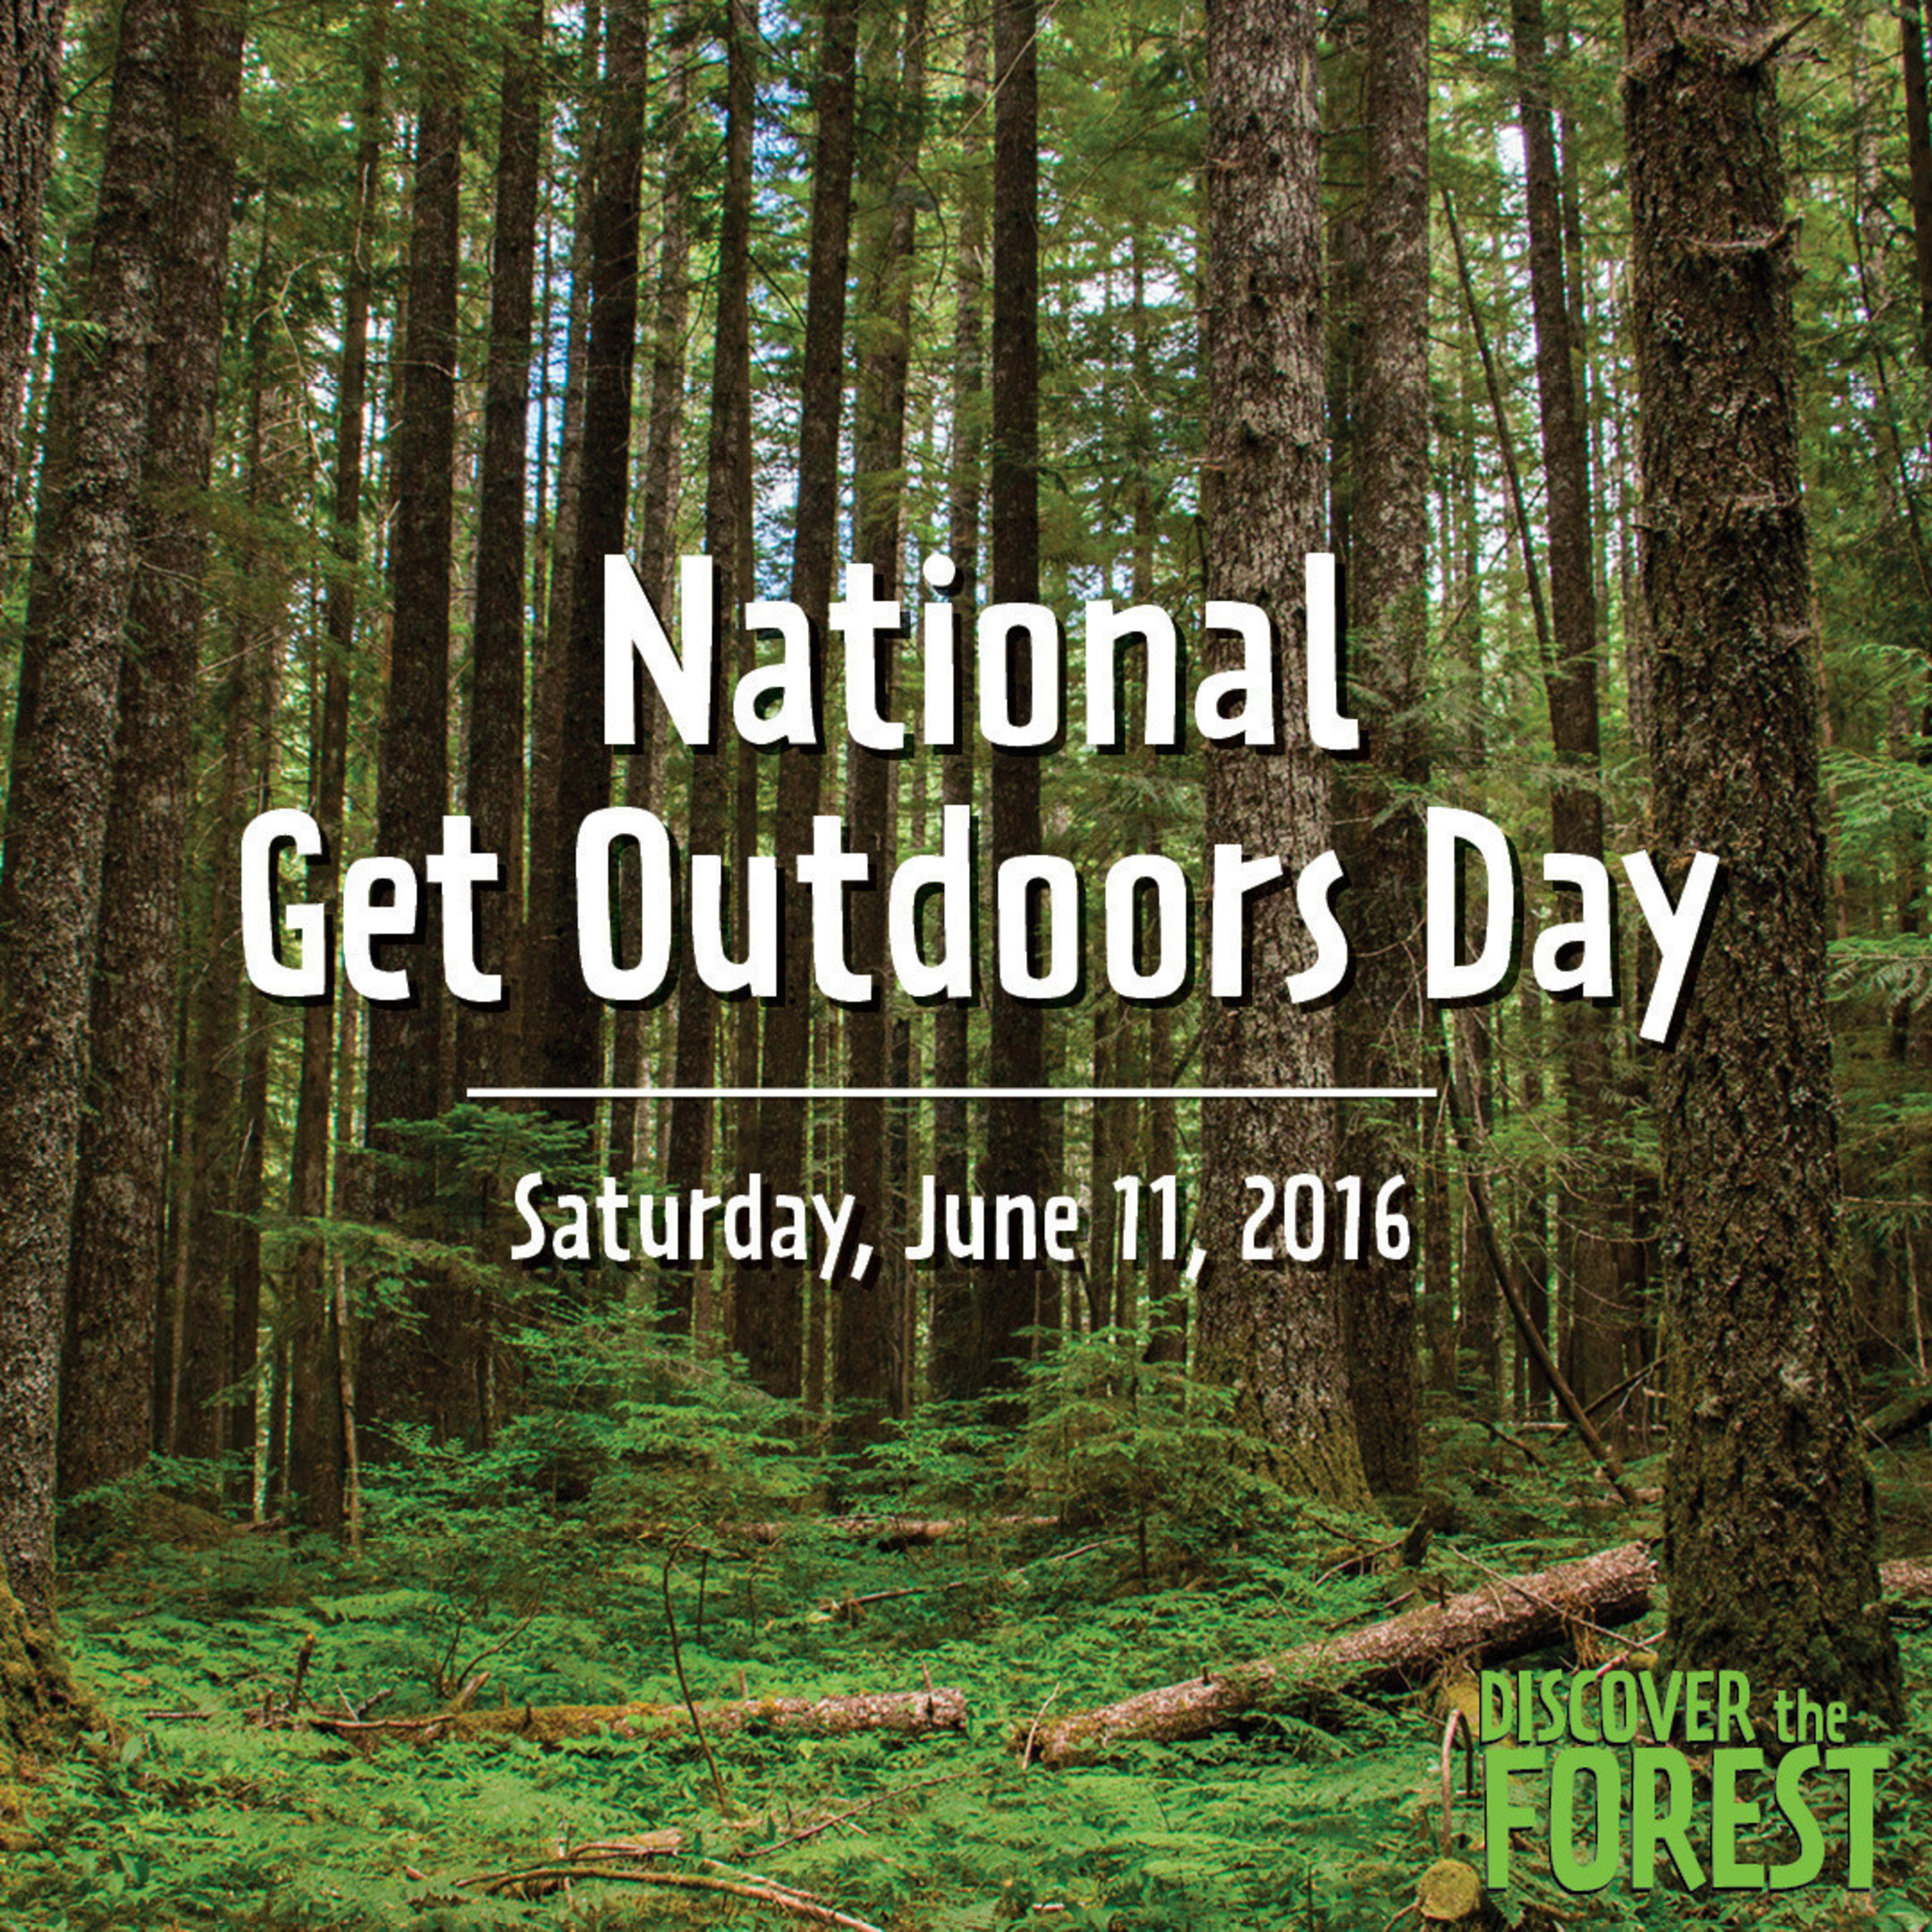 Discover the Forest for National Get Outdoors Day